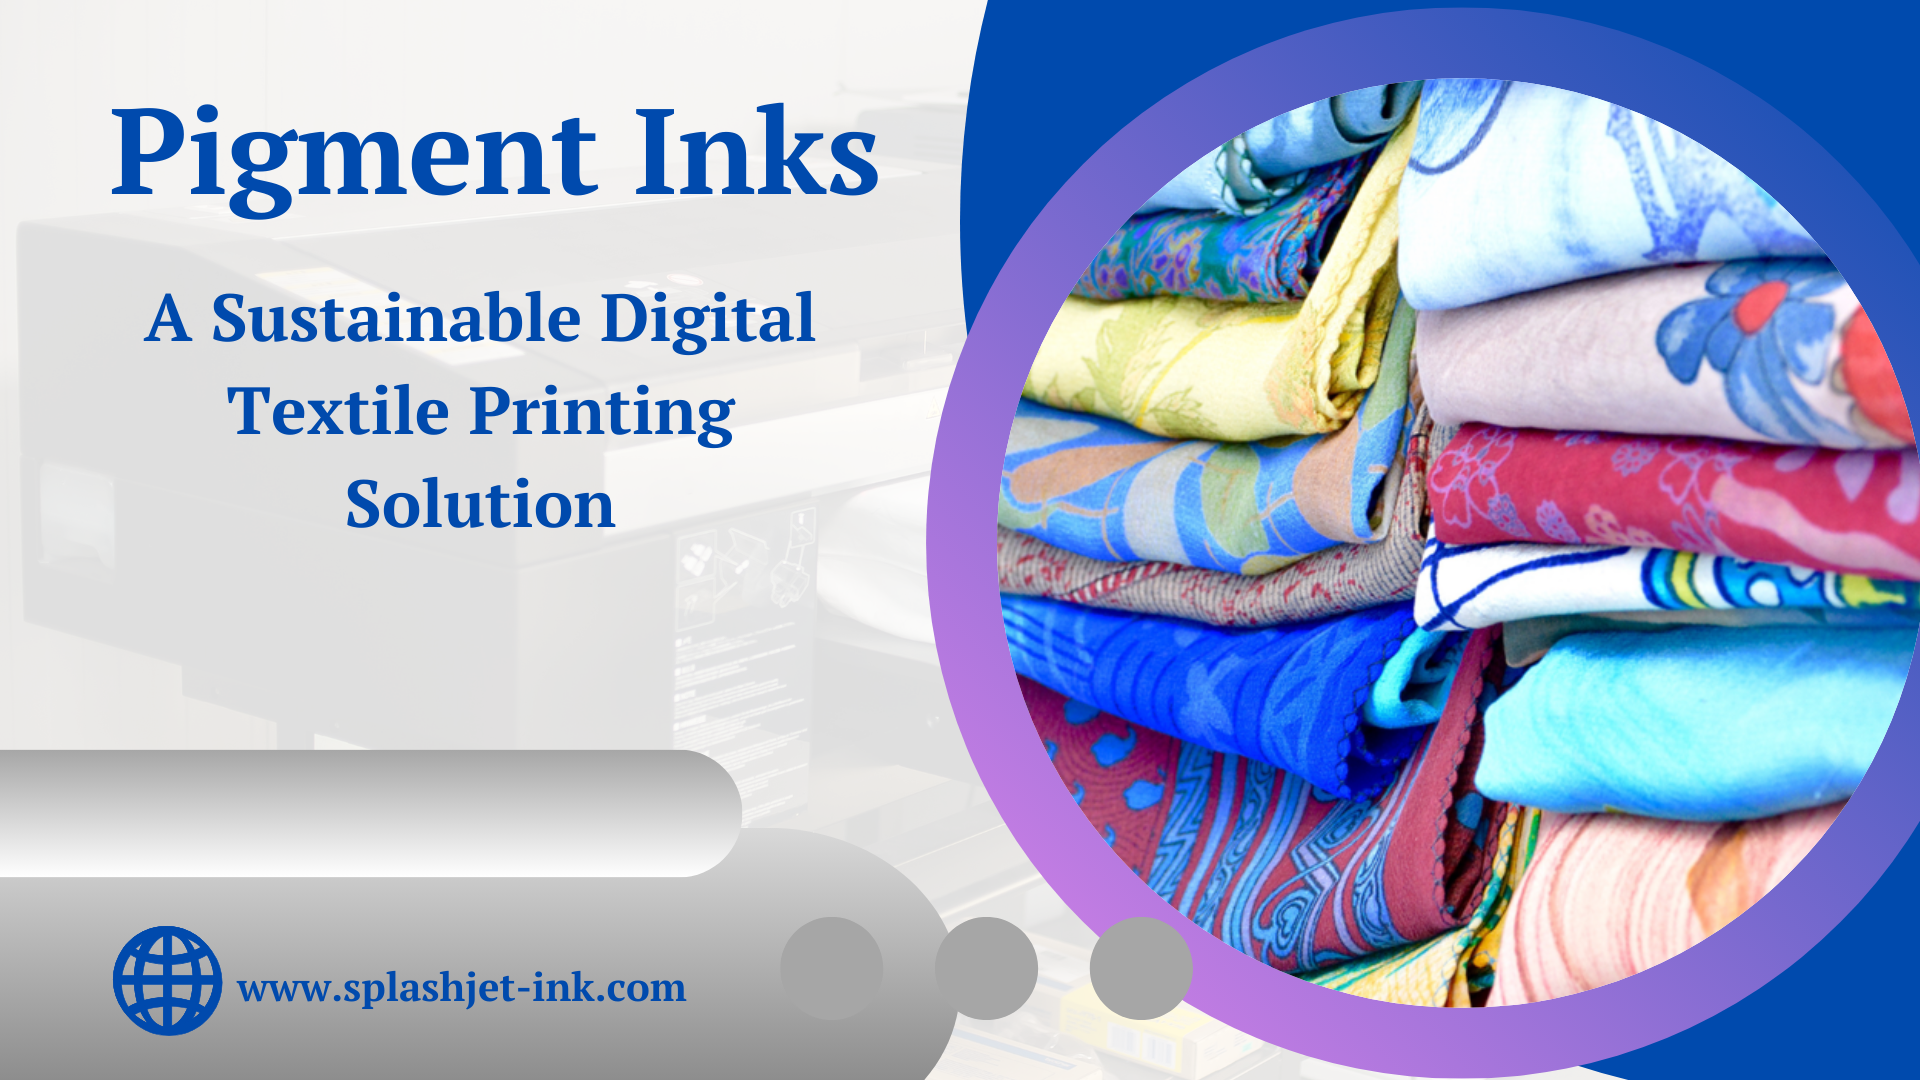 Pigment Inks- A Sustainable Digital Textile Printing Solution